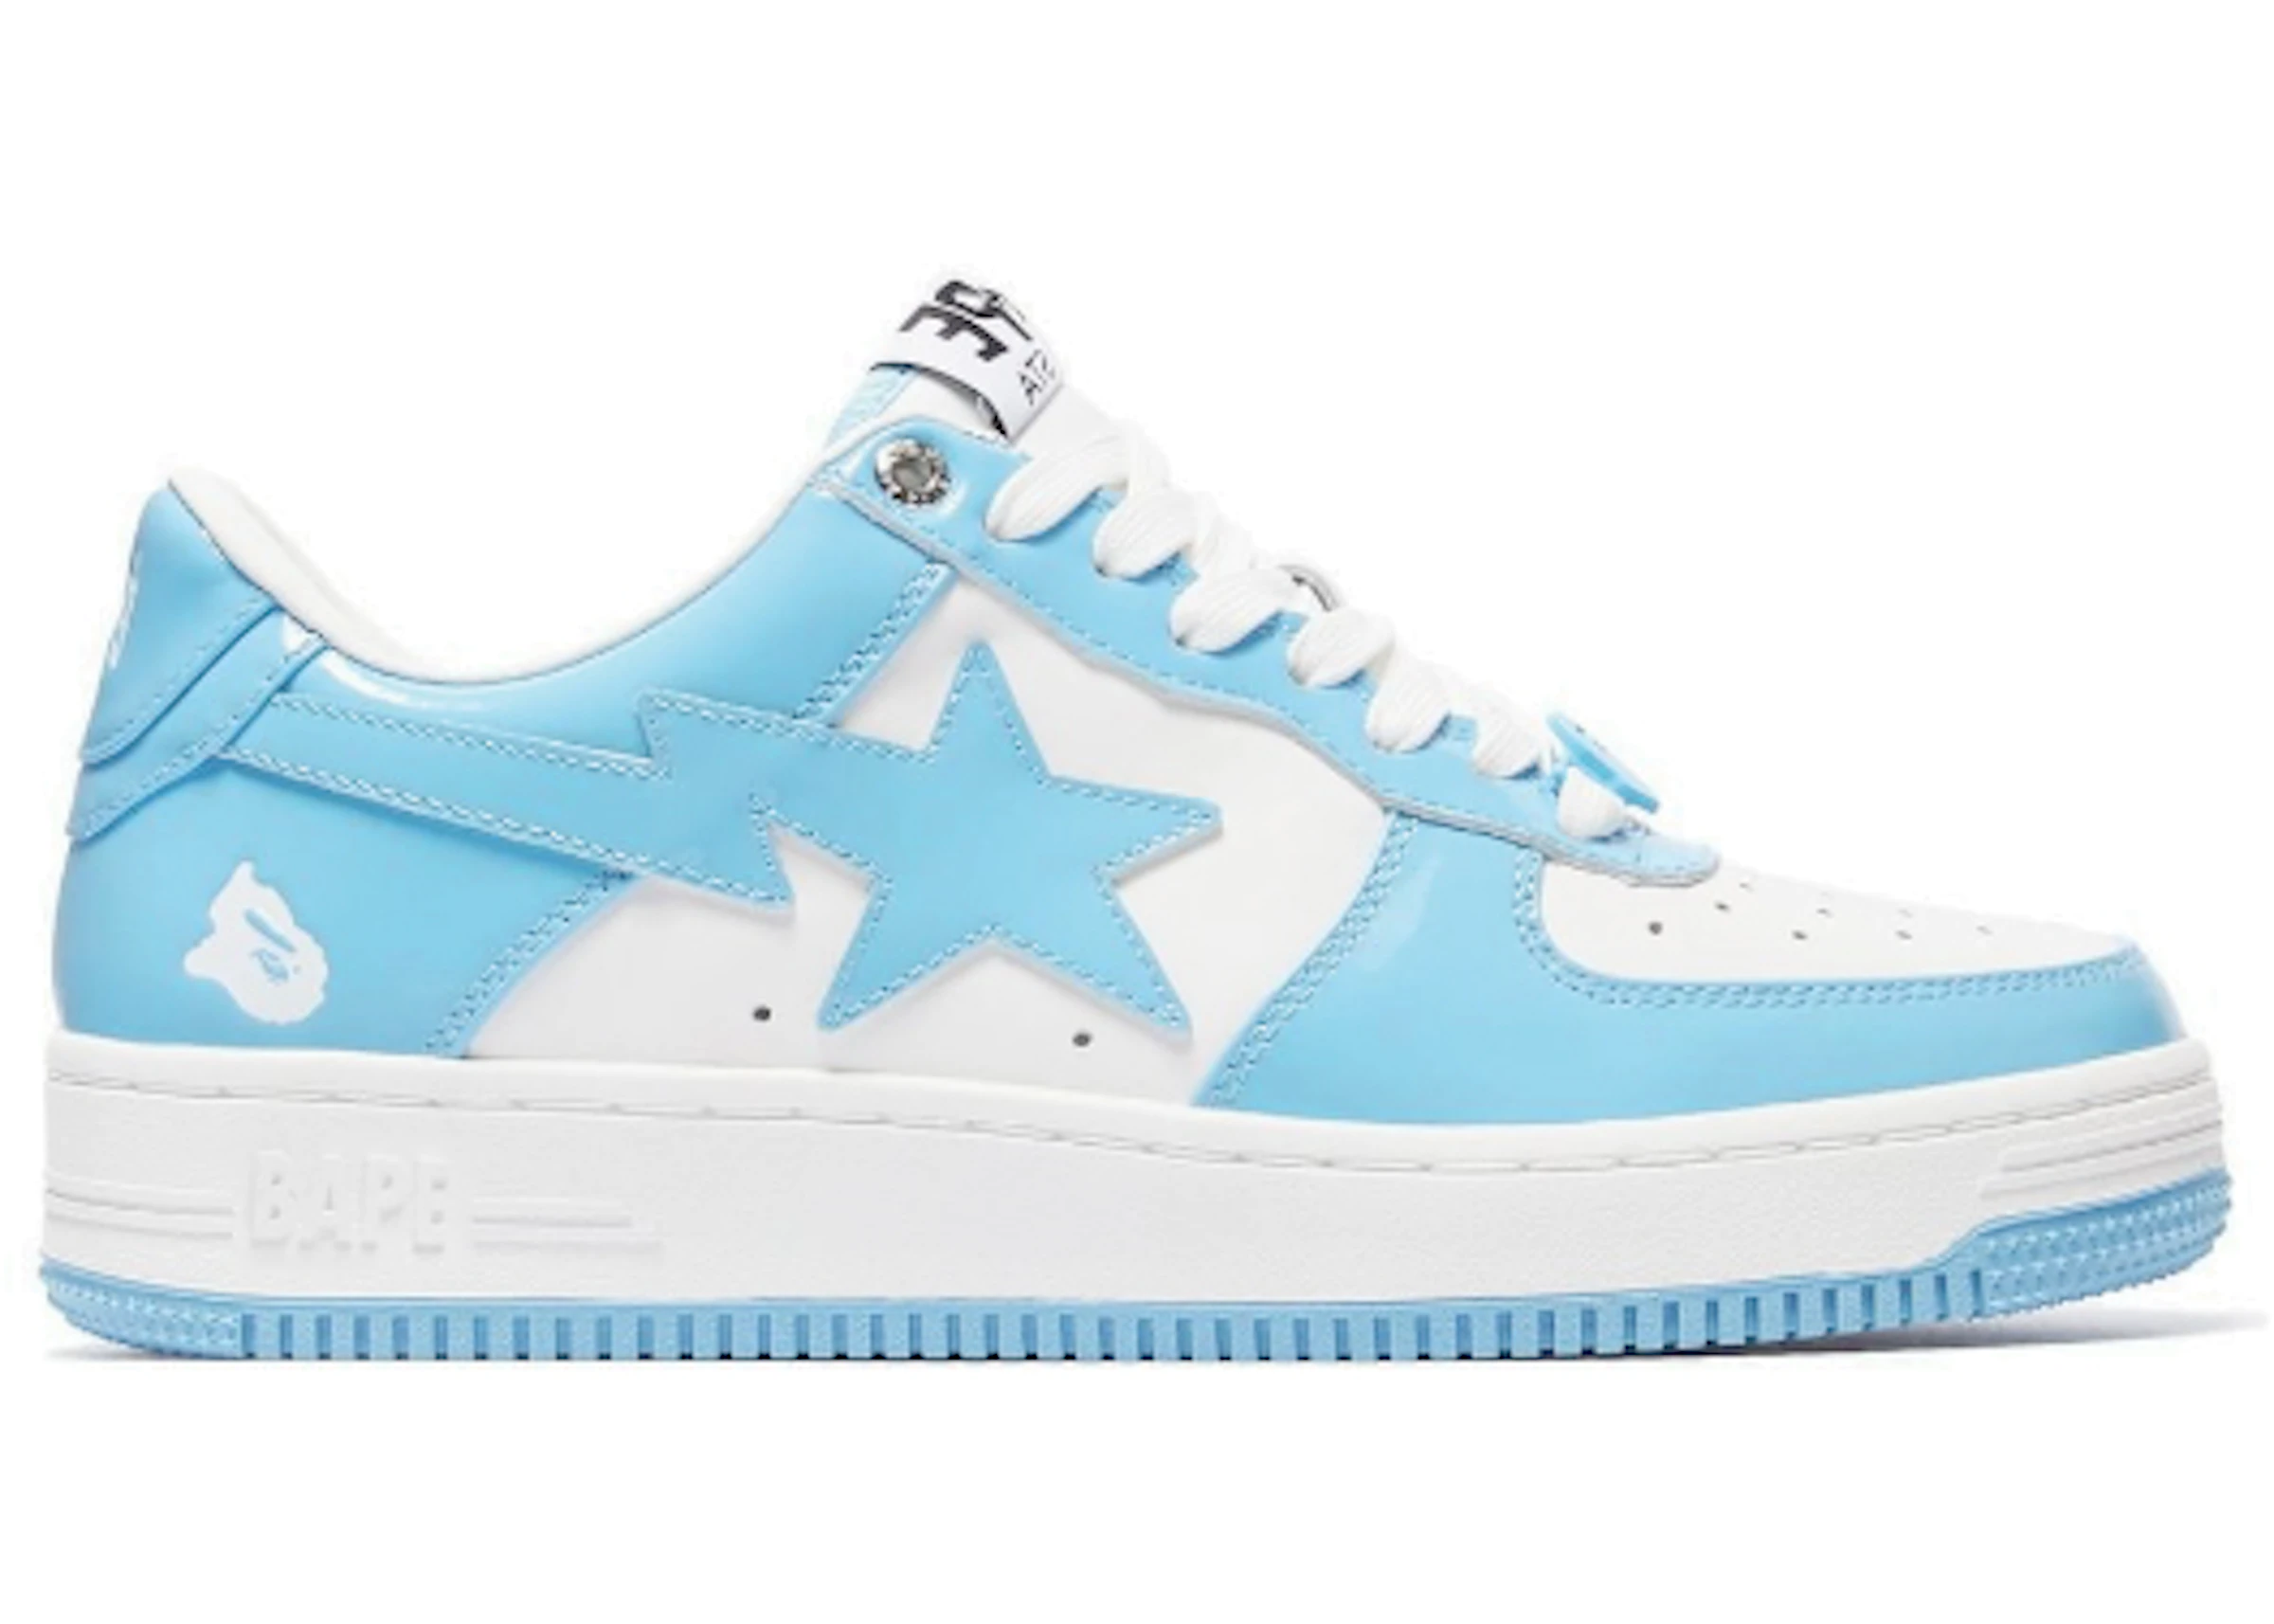 Tot ziens hybride Annoteren A Bathing Ape Bape Sta Patent Leather Blue White -  1I70-291-001/1I70-191-002 - US